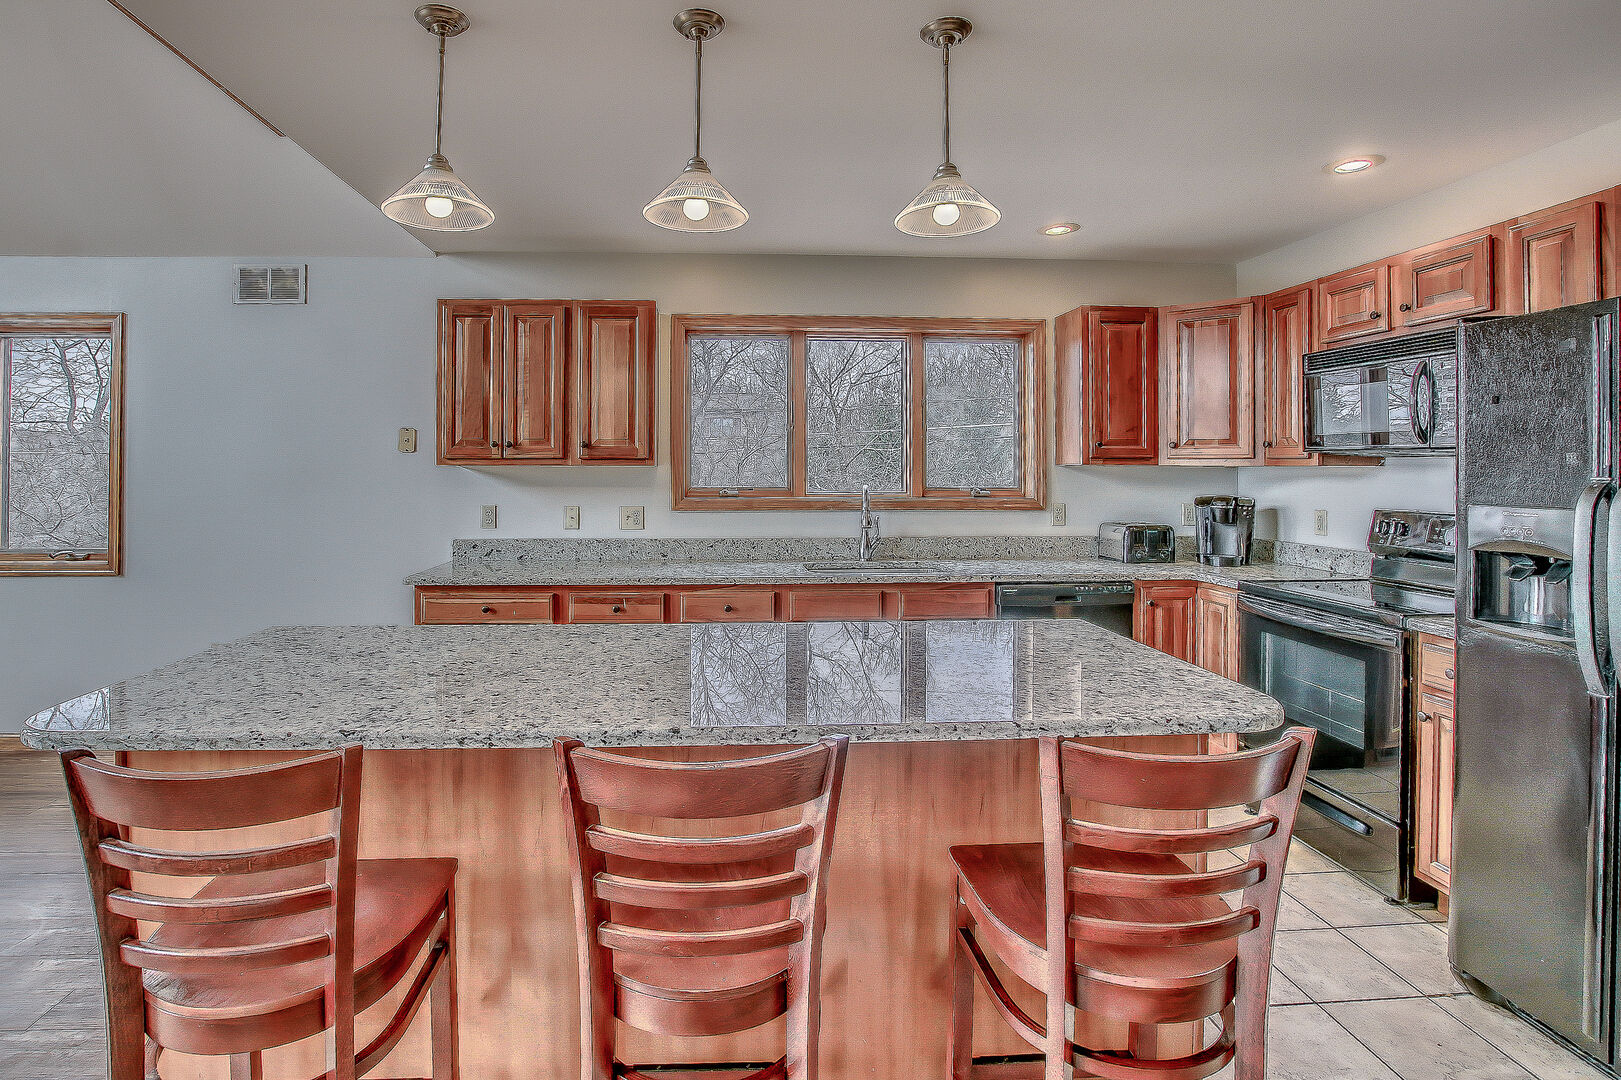 Spacious Kitchen Features Island, Chairs, and Refrigerator.